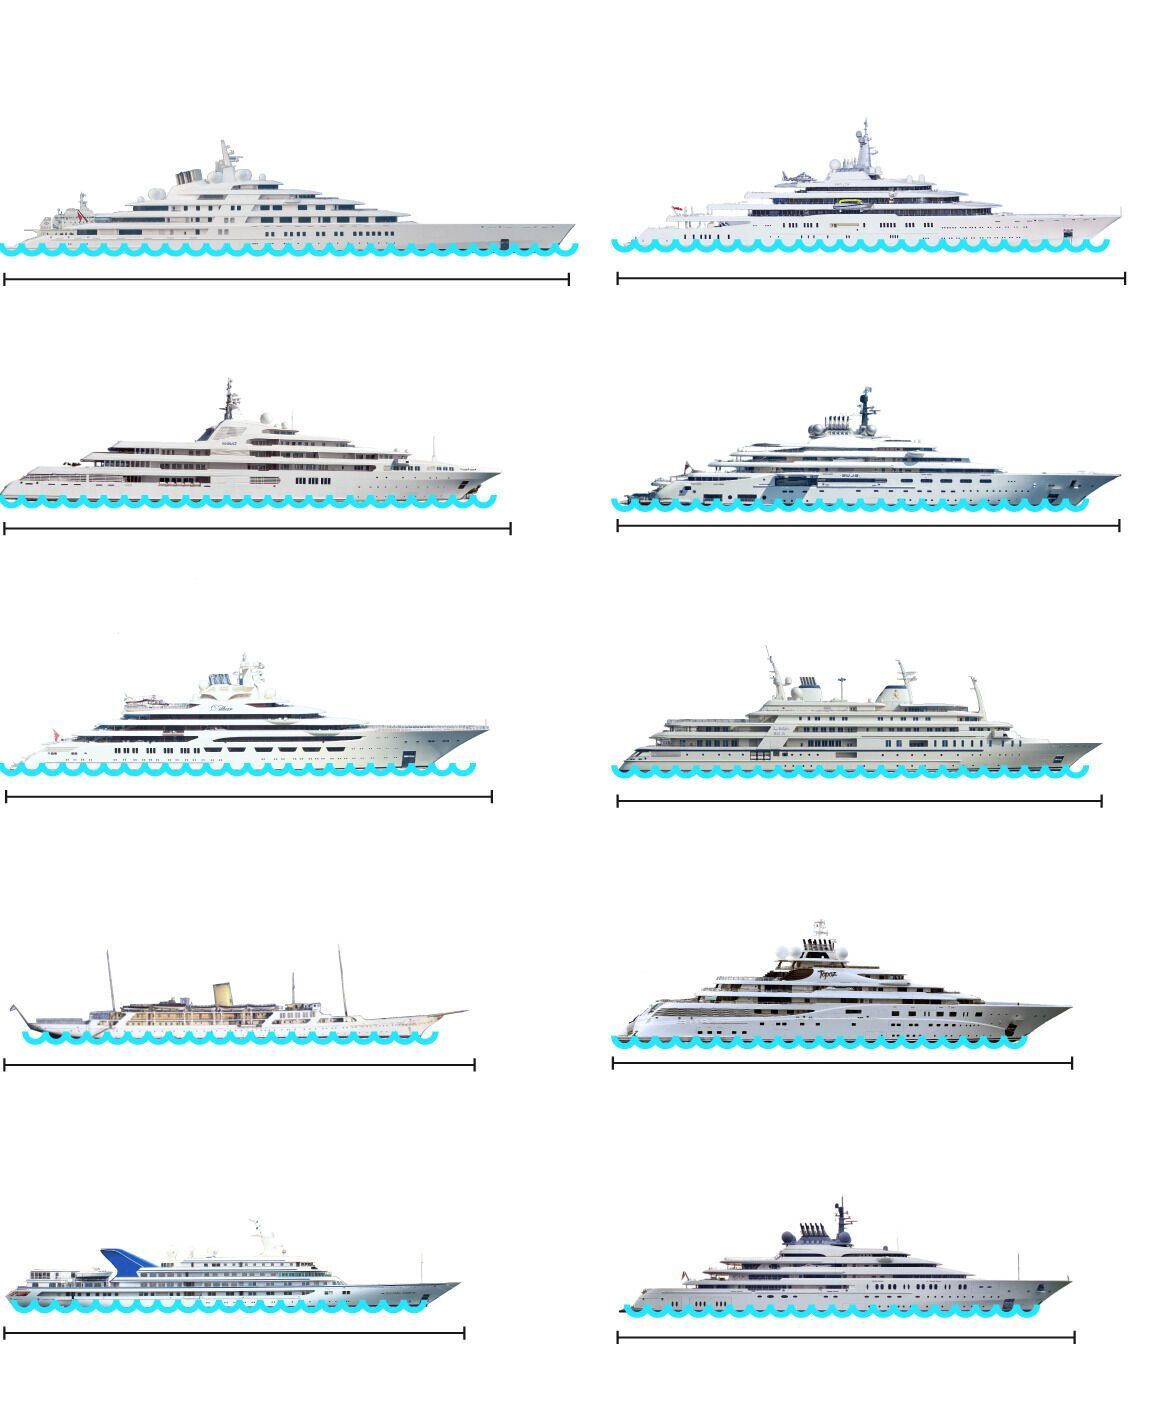 Submarines, swimming pools and helicopters on board: the ten largest superyachts in the world